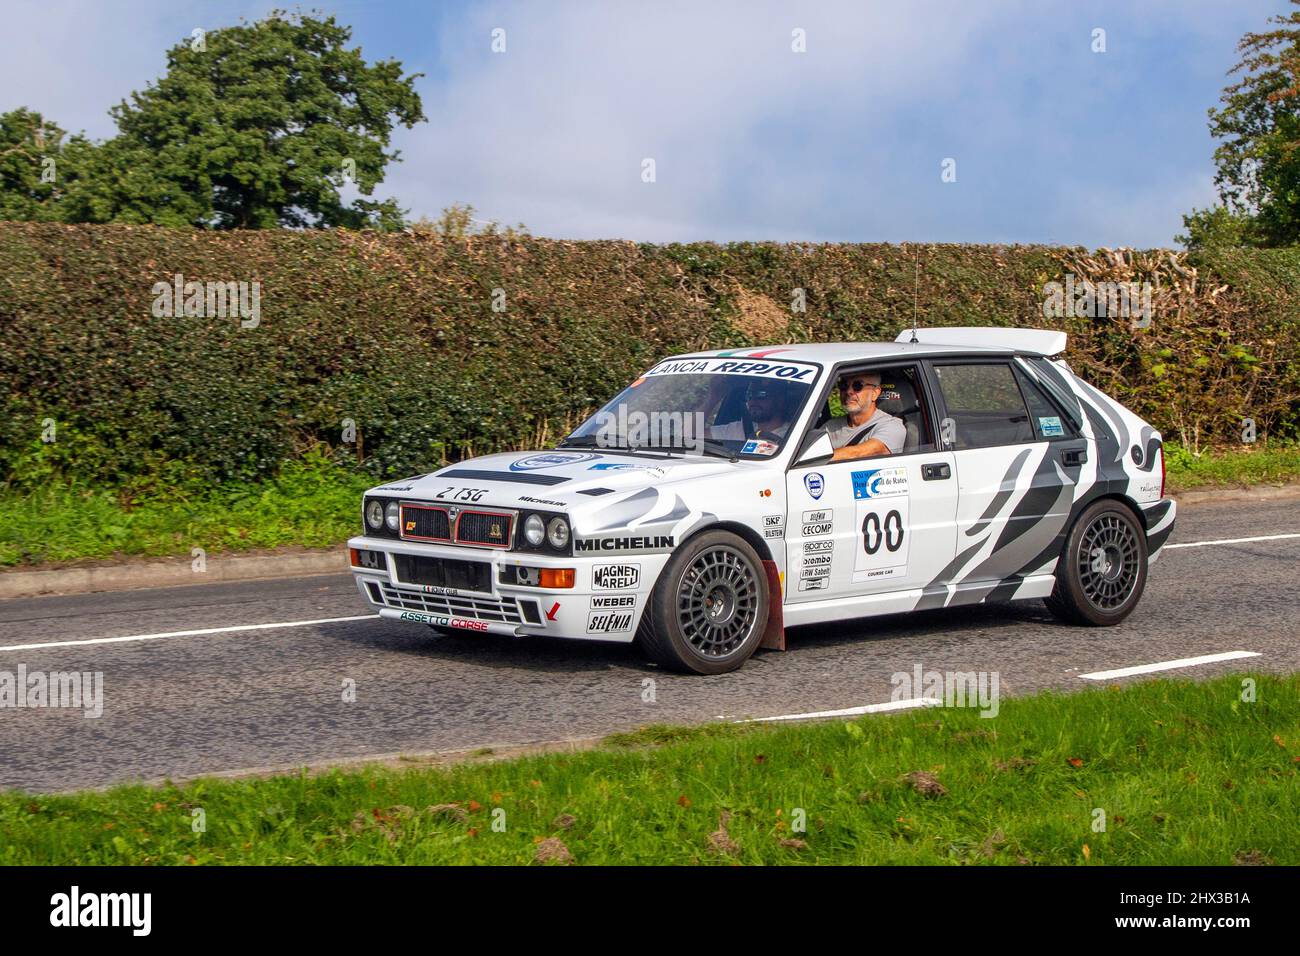 1991 90s nineties white Lancia Delta HF Turbo 4WD Repsol Rally Race Course Car; en-route to Leighton Hall classic August car show Carnforth, UK Stock Photo